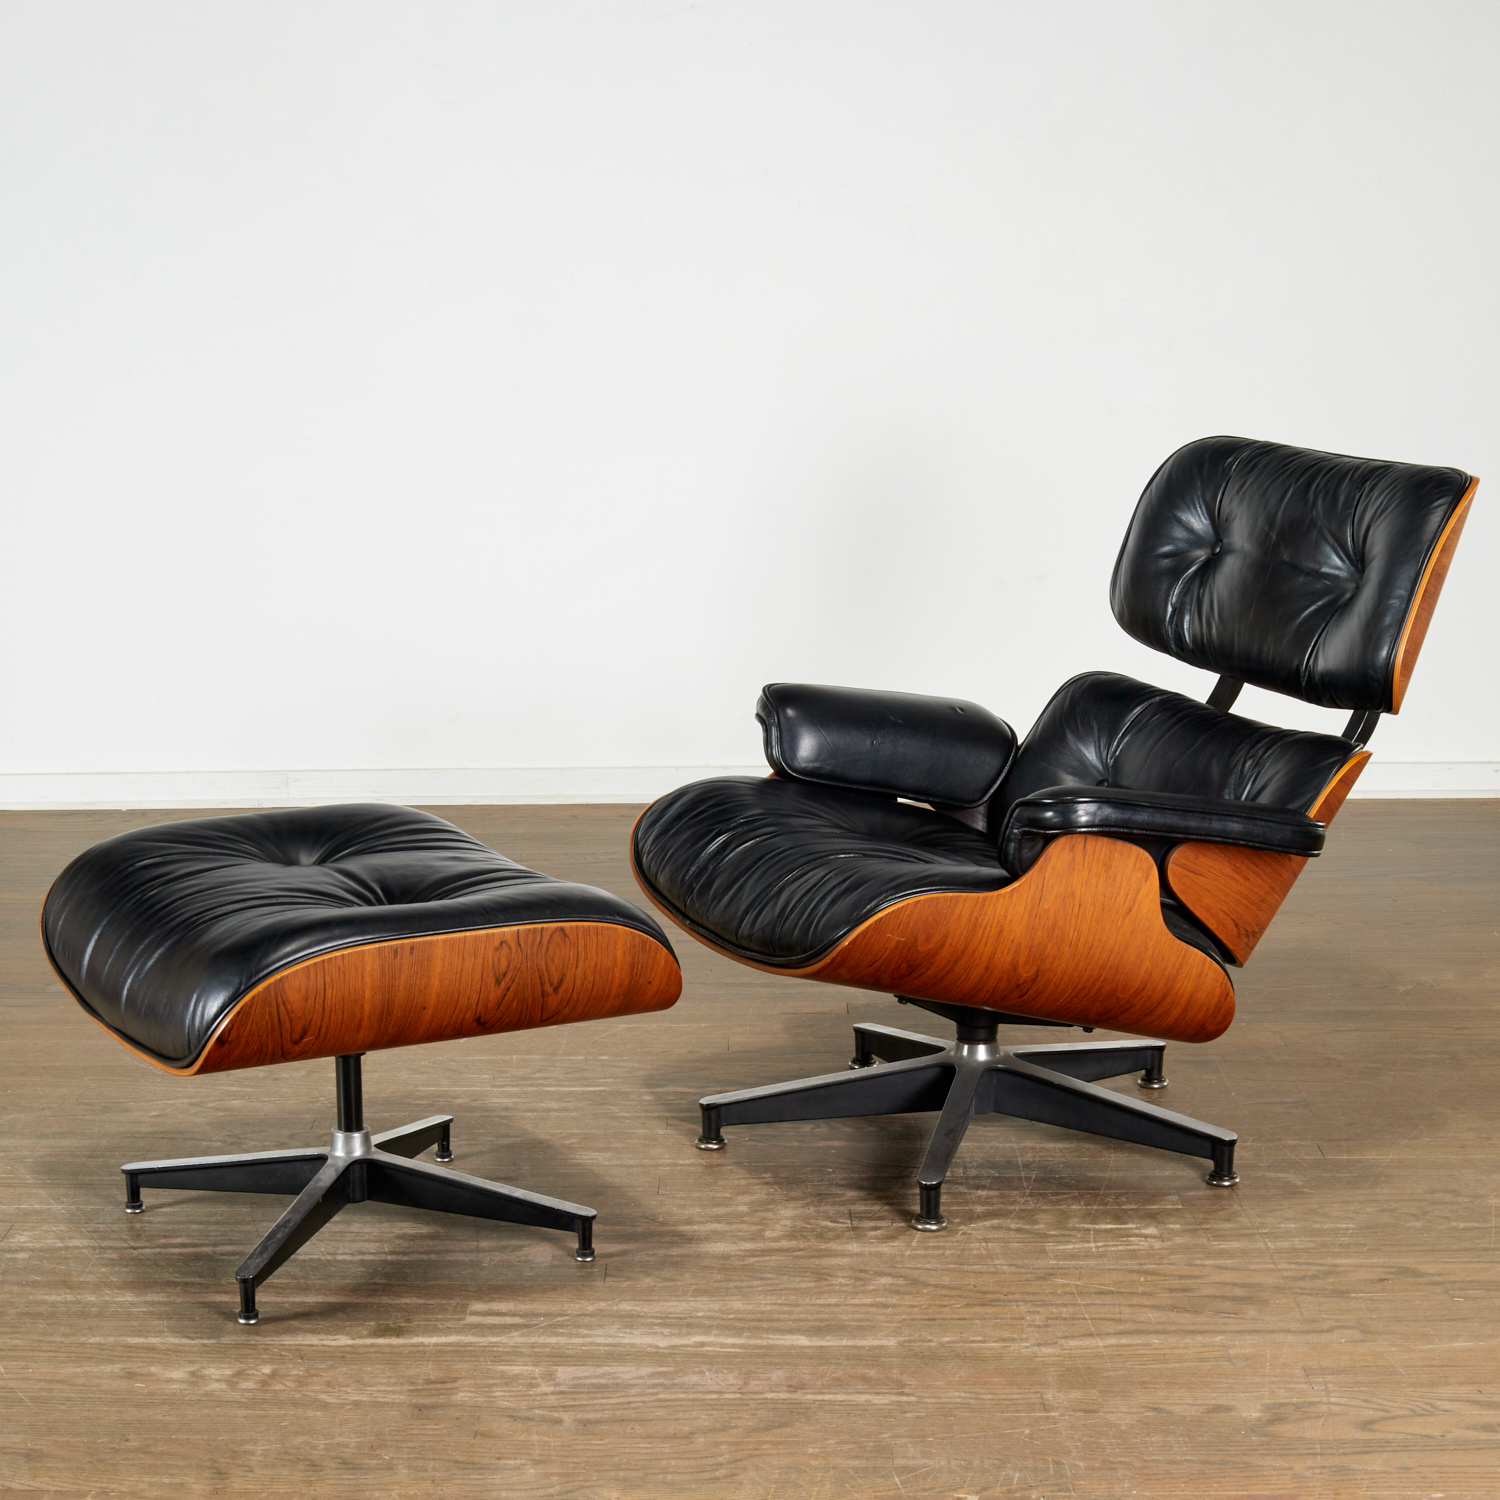 CHARLES RAY EAMES EAMES LOUNGE 2bf8d1